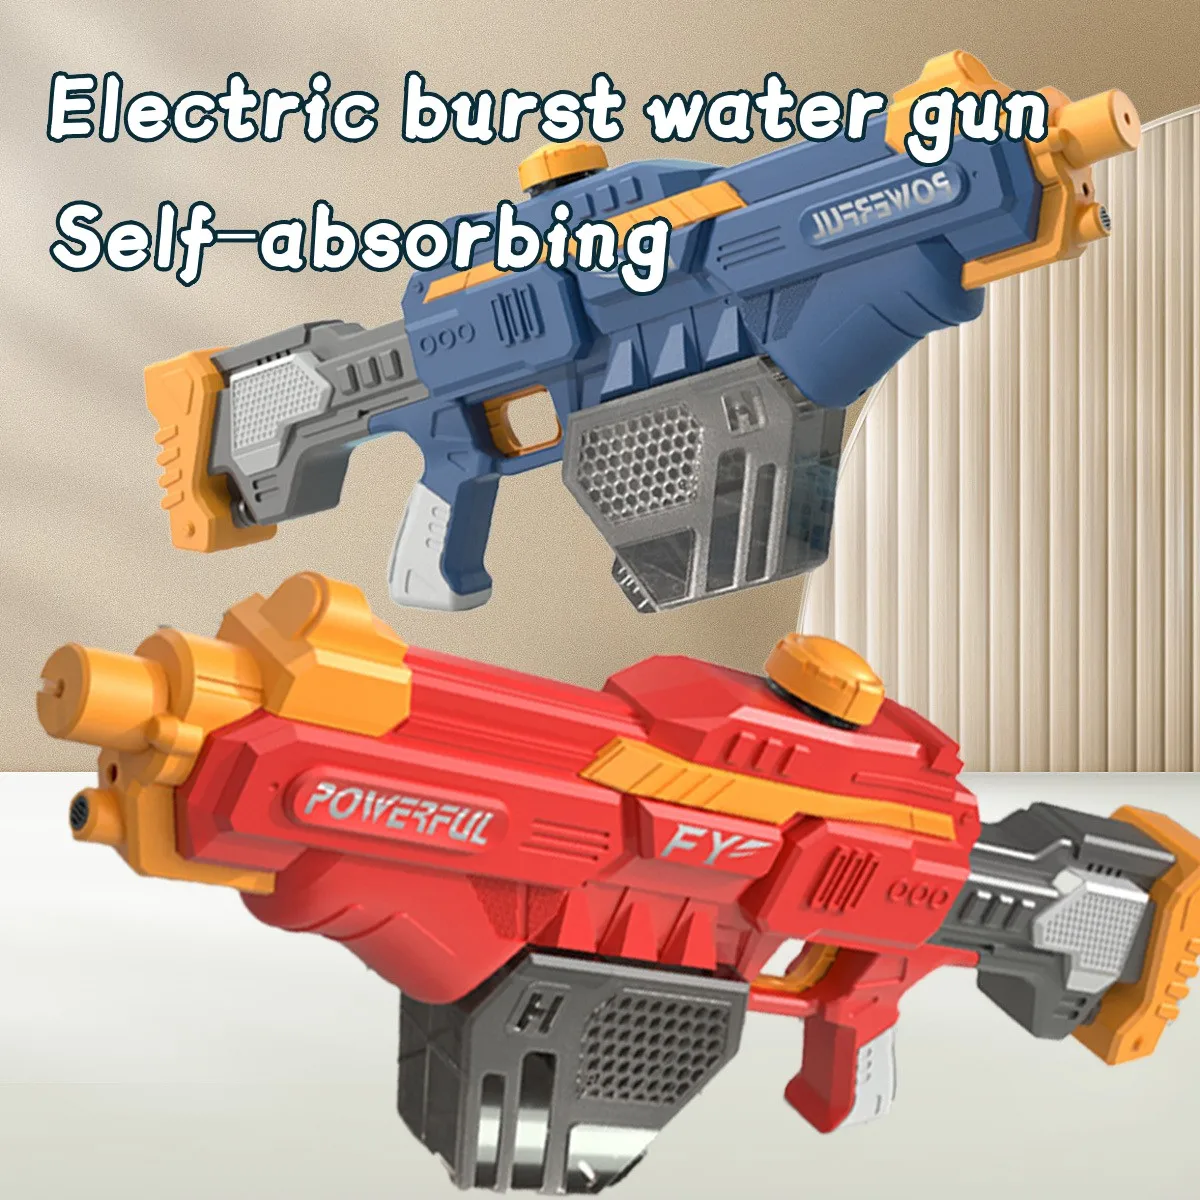 new-electric-water-gun-toy-automatic-water-absorption-electric-burst-water-gun-beach-water-toy-large-bared-water-gun